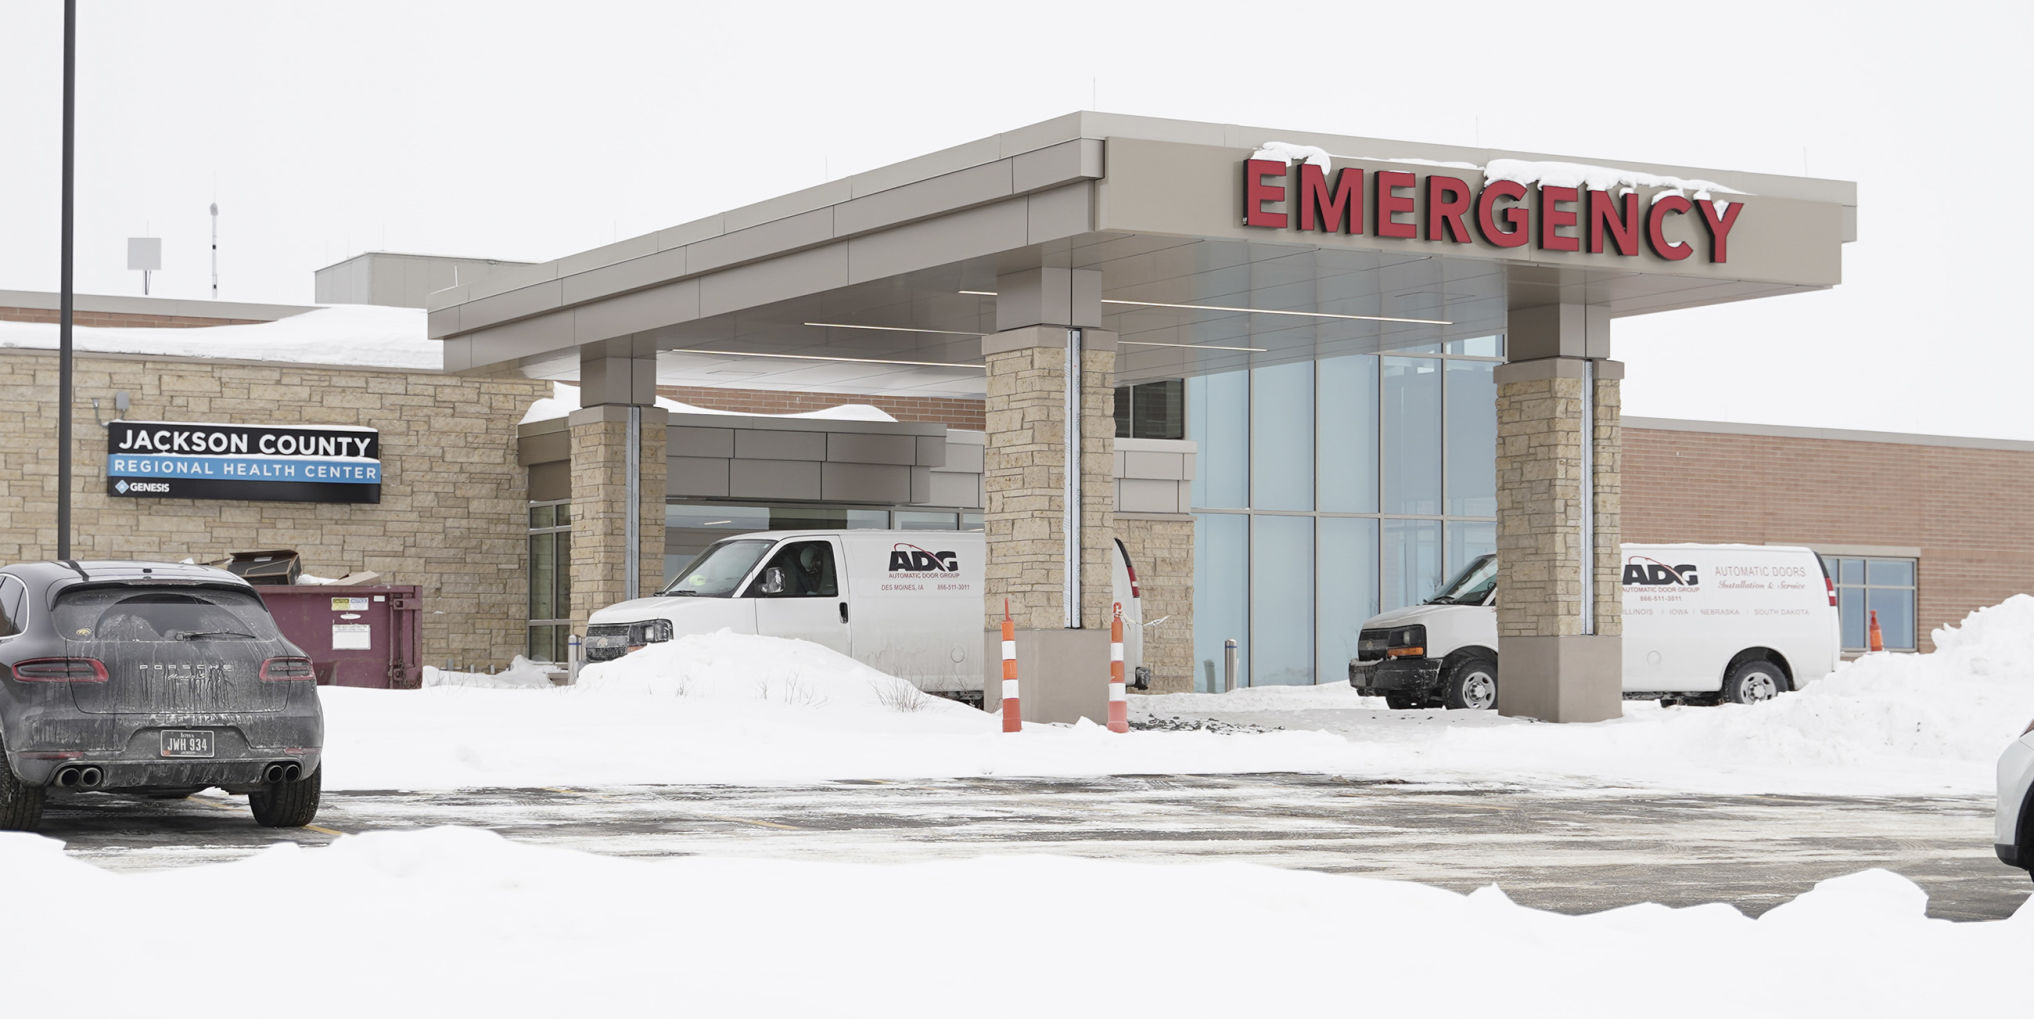 The new Jackson County Regional Health Center in Maquoketa, Iowa, is expected to open early next month. Photo taken on Friday, Feb. 12, 2021. PHOTO CREDIT: Paul Kurutsides